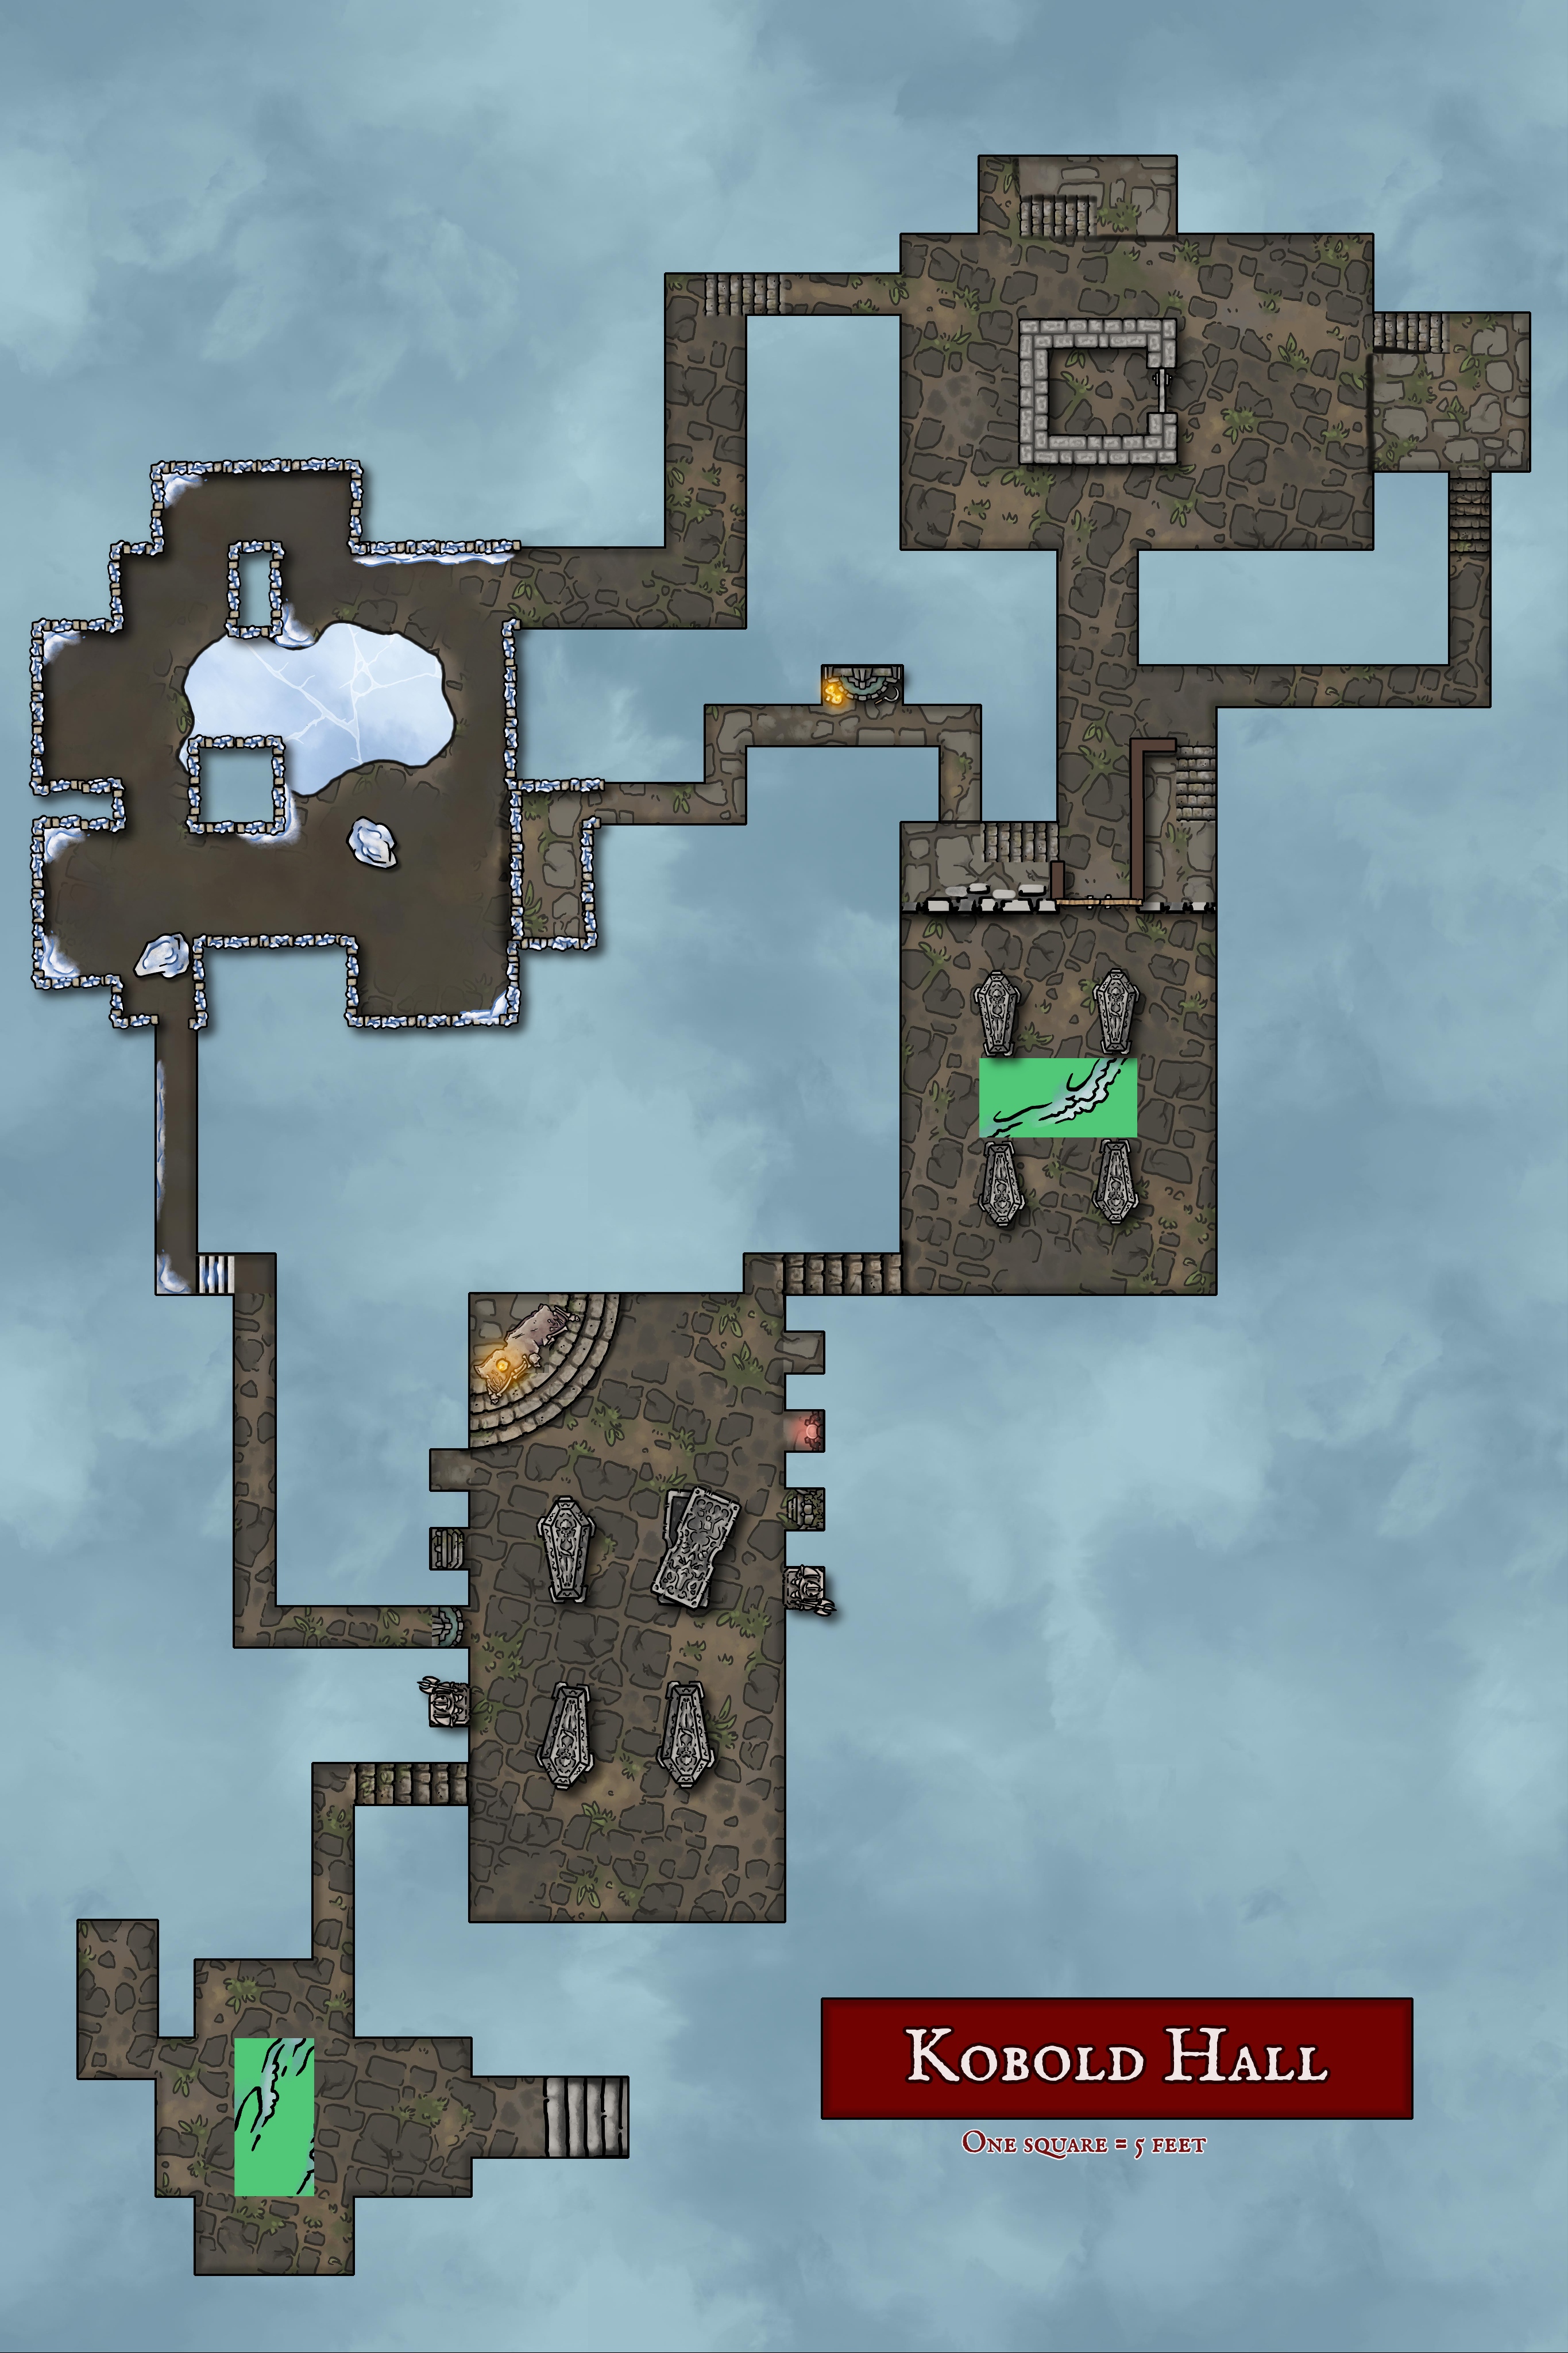 My version of Kobold Hall with additional passageways and loopbacks.